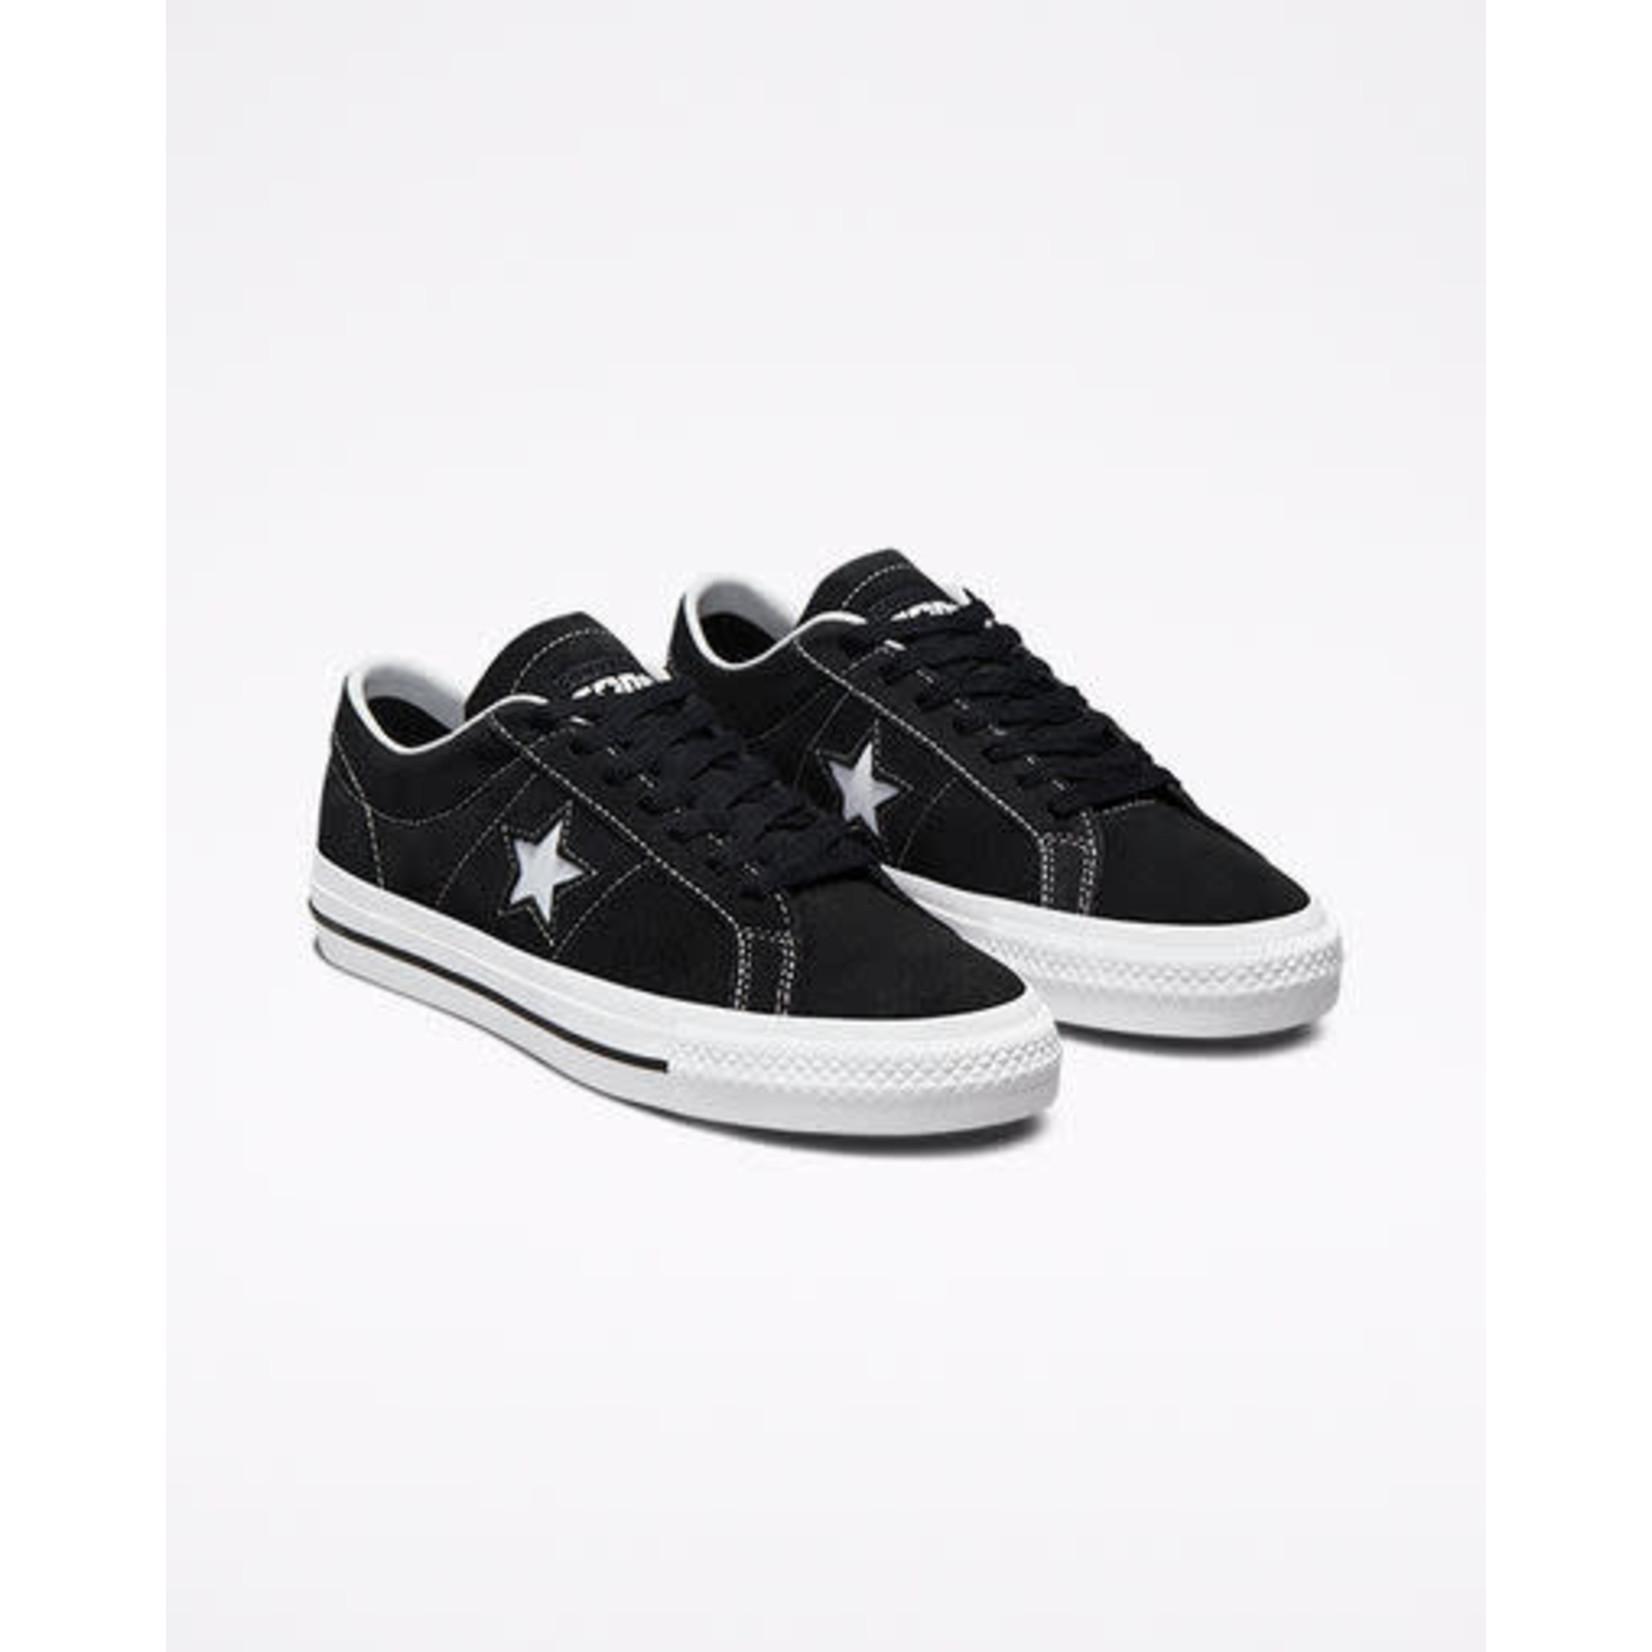 Converse Cons Converse CONS One Star Pro Suede (Black/Black/White)